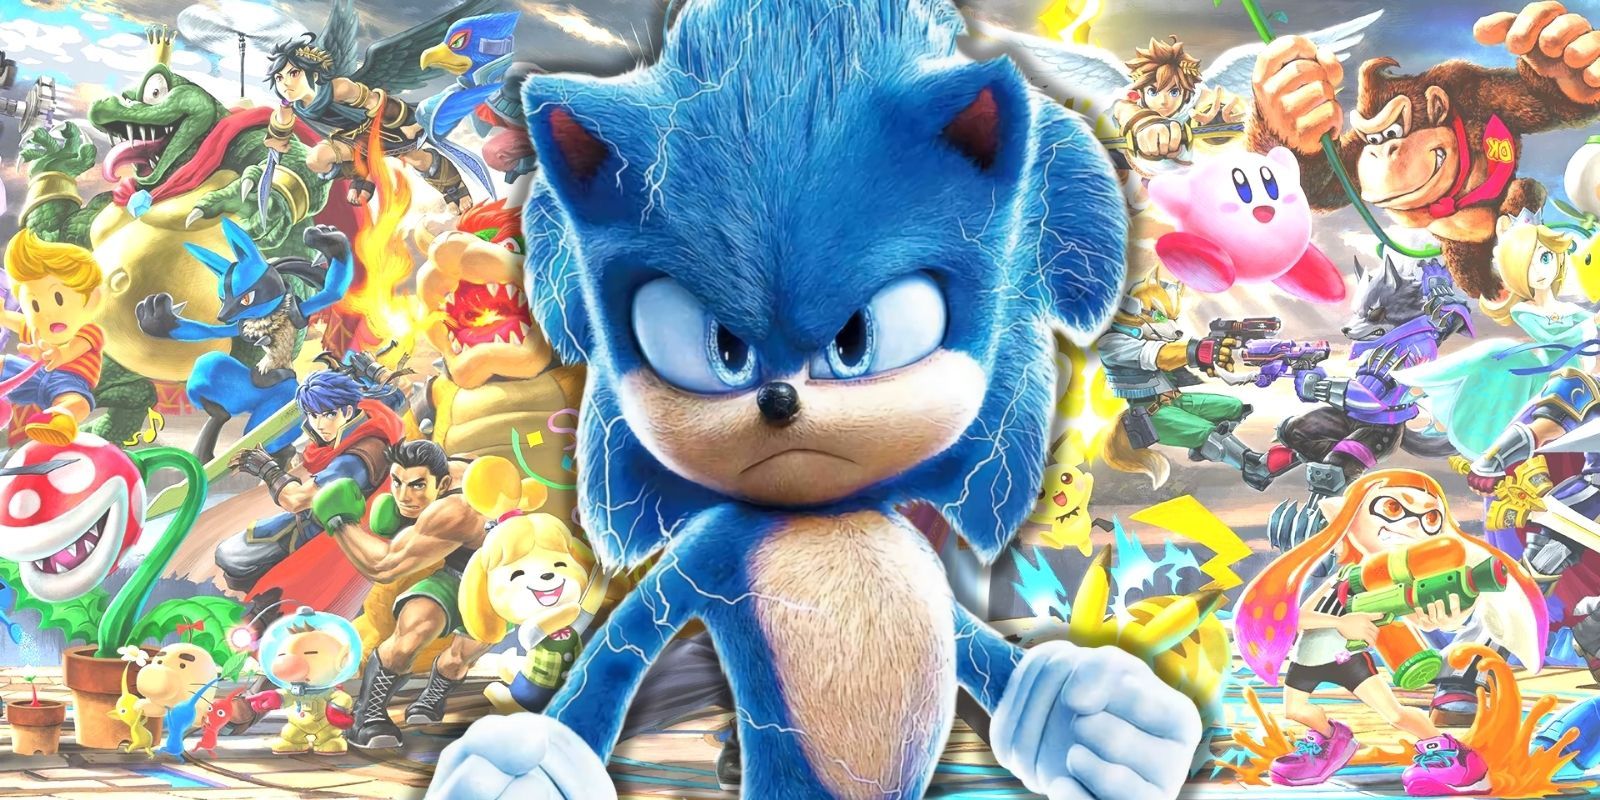 Super Sonic: SONIC THE HEDGEHOG 2 Director Jeff Fowler Brings an Iconic  Speedster Back to the Big Screen - Boxoffice